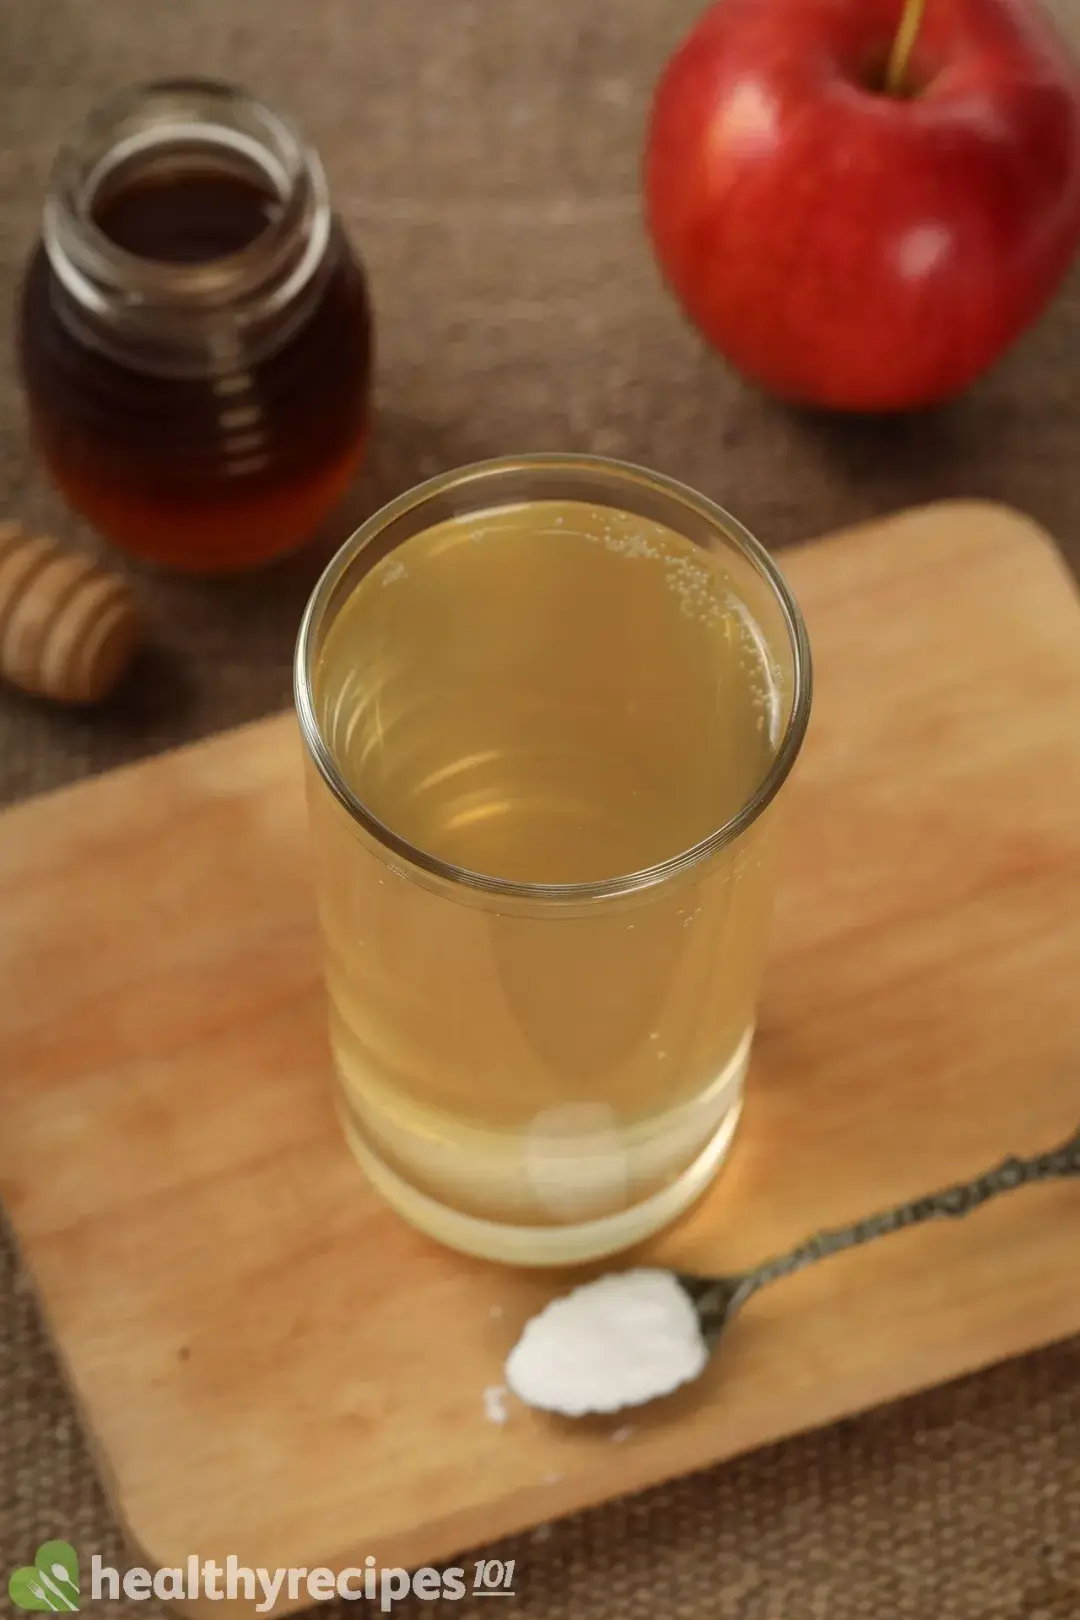 A tall glass of diluted apple cider vinegar, next to a spoonful of baking soda, a honey jar, and a red apple